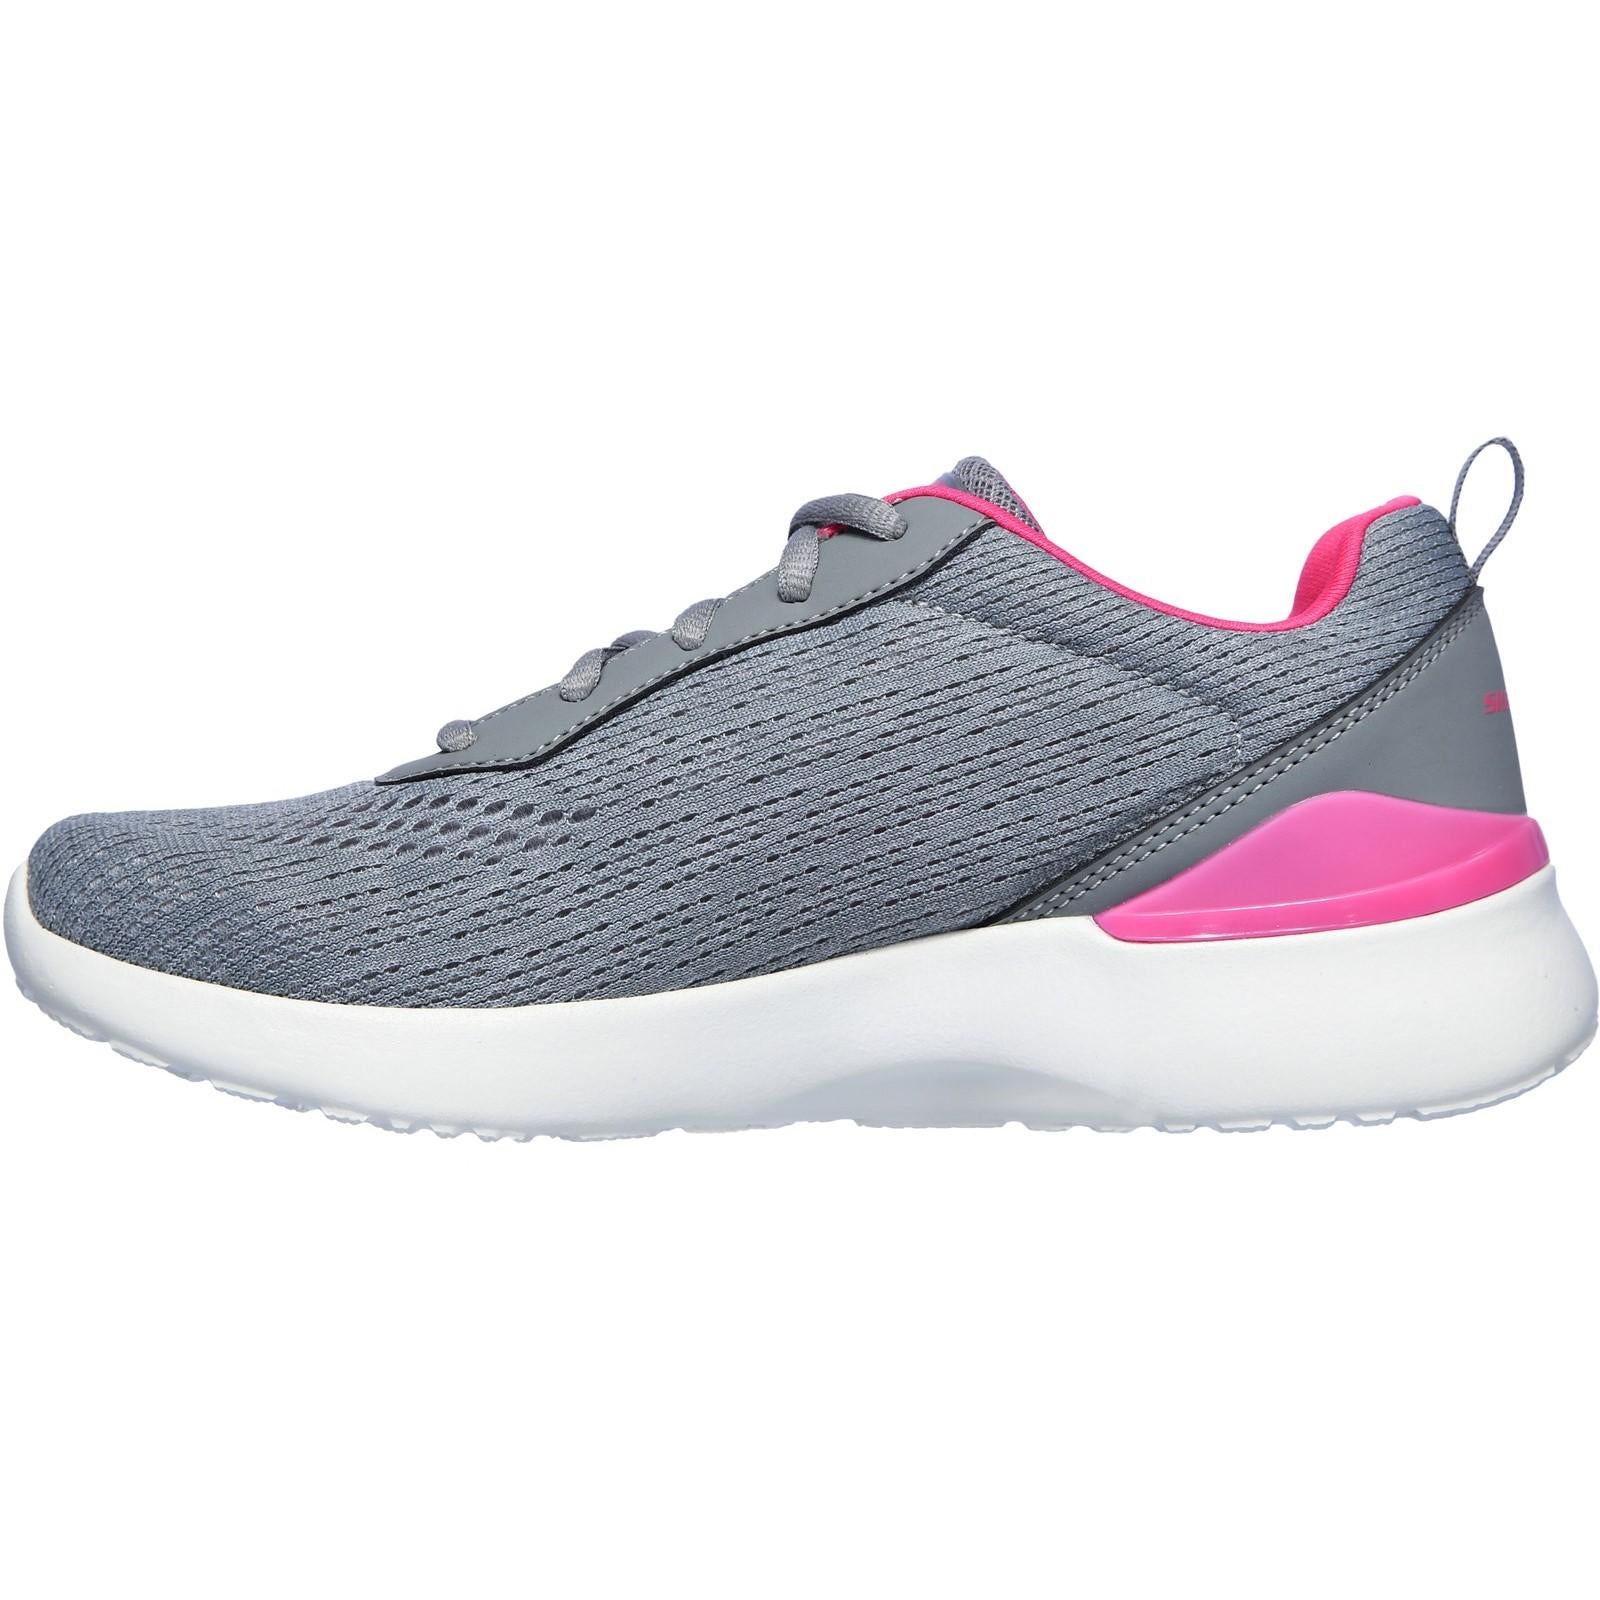 Skechers Skech-Air Dynamight Top Prize Trainer